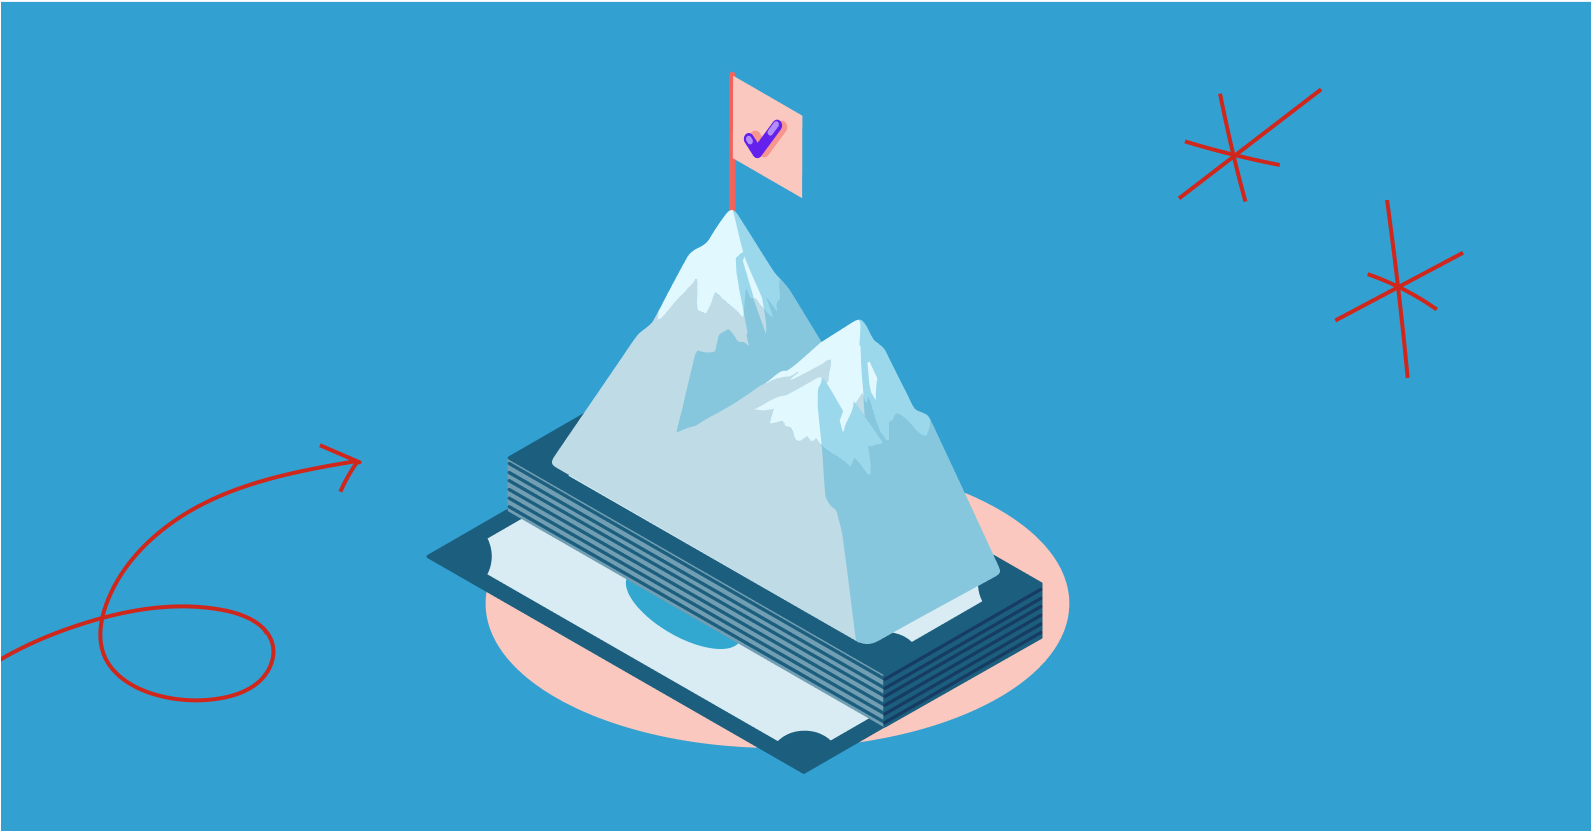 illustration showing flag atop a mountain peak on top of a stack of money, suggesting having "won" at becoming financially stable.